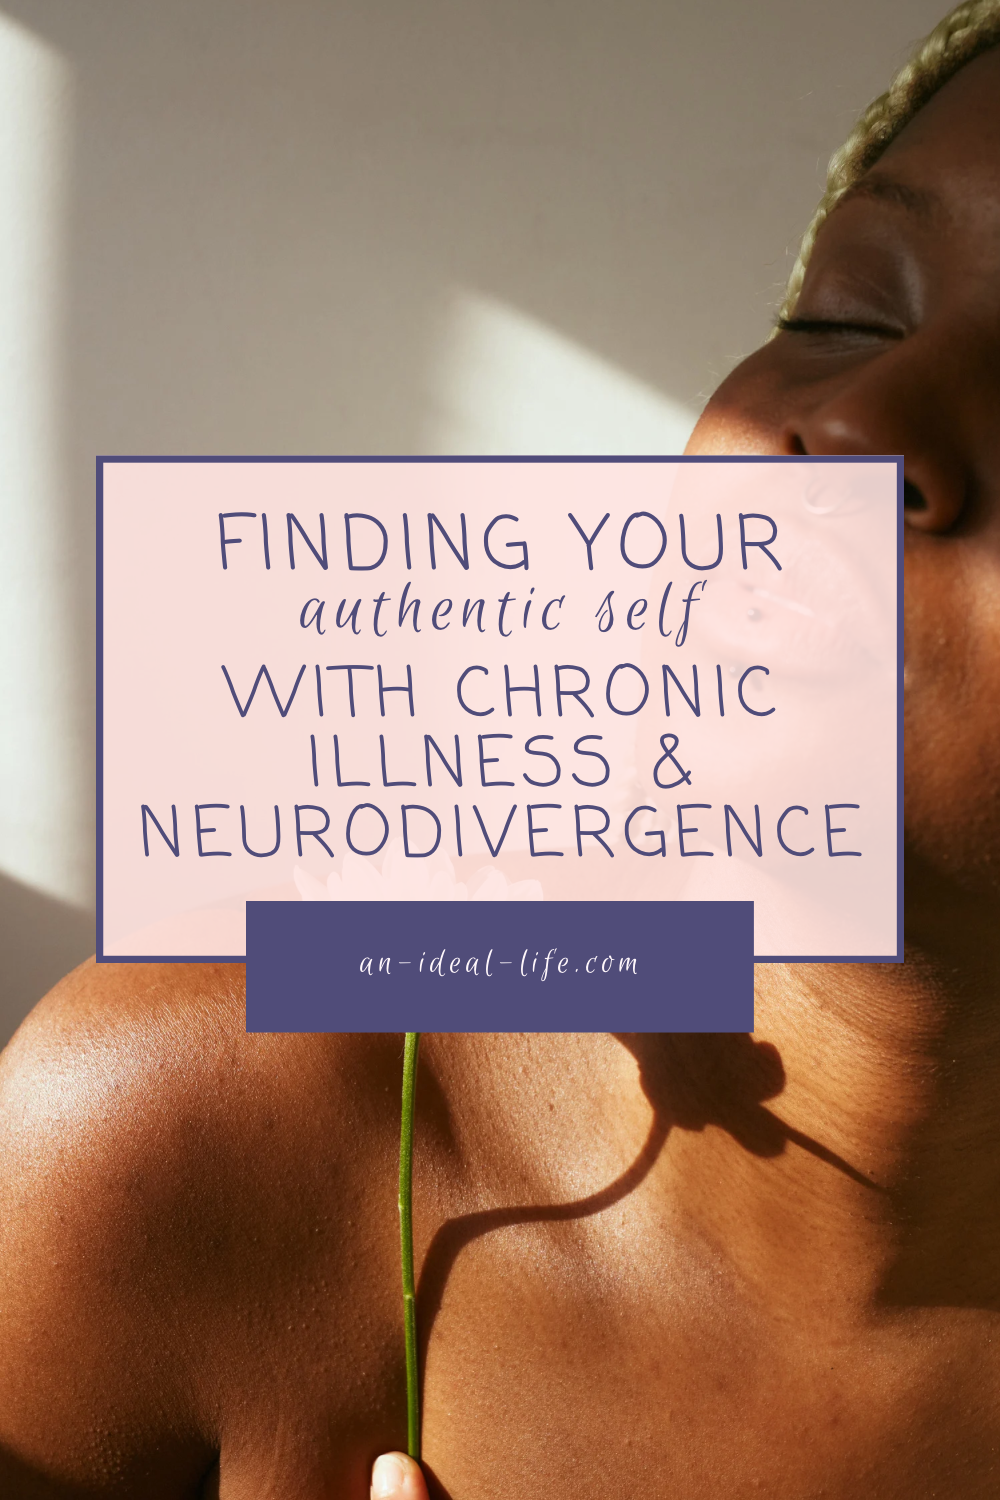 Finding Your Authentic Self With Chronic Illness and Neurodivergence